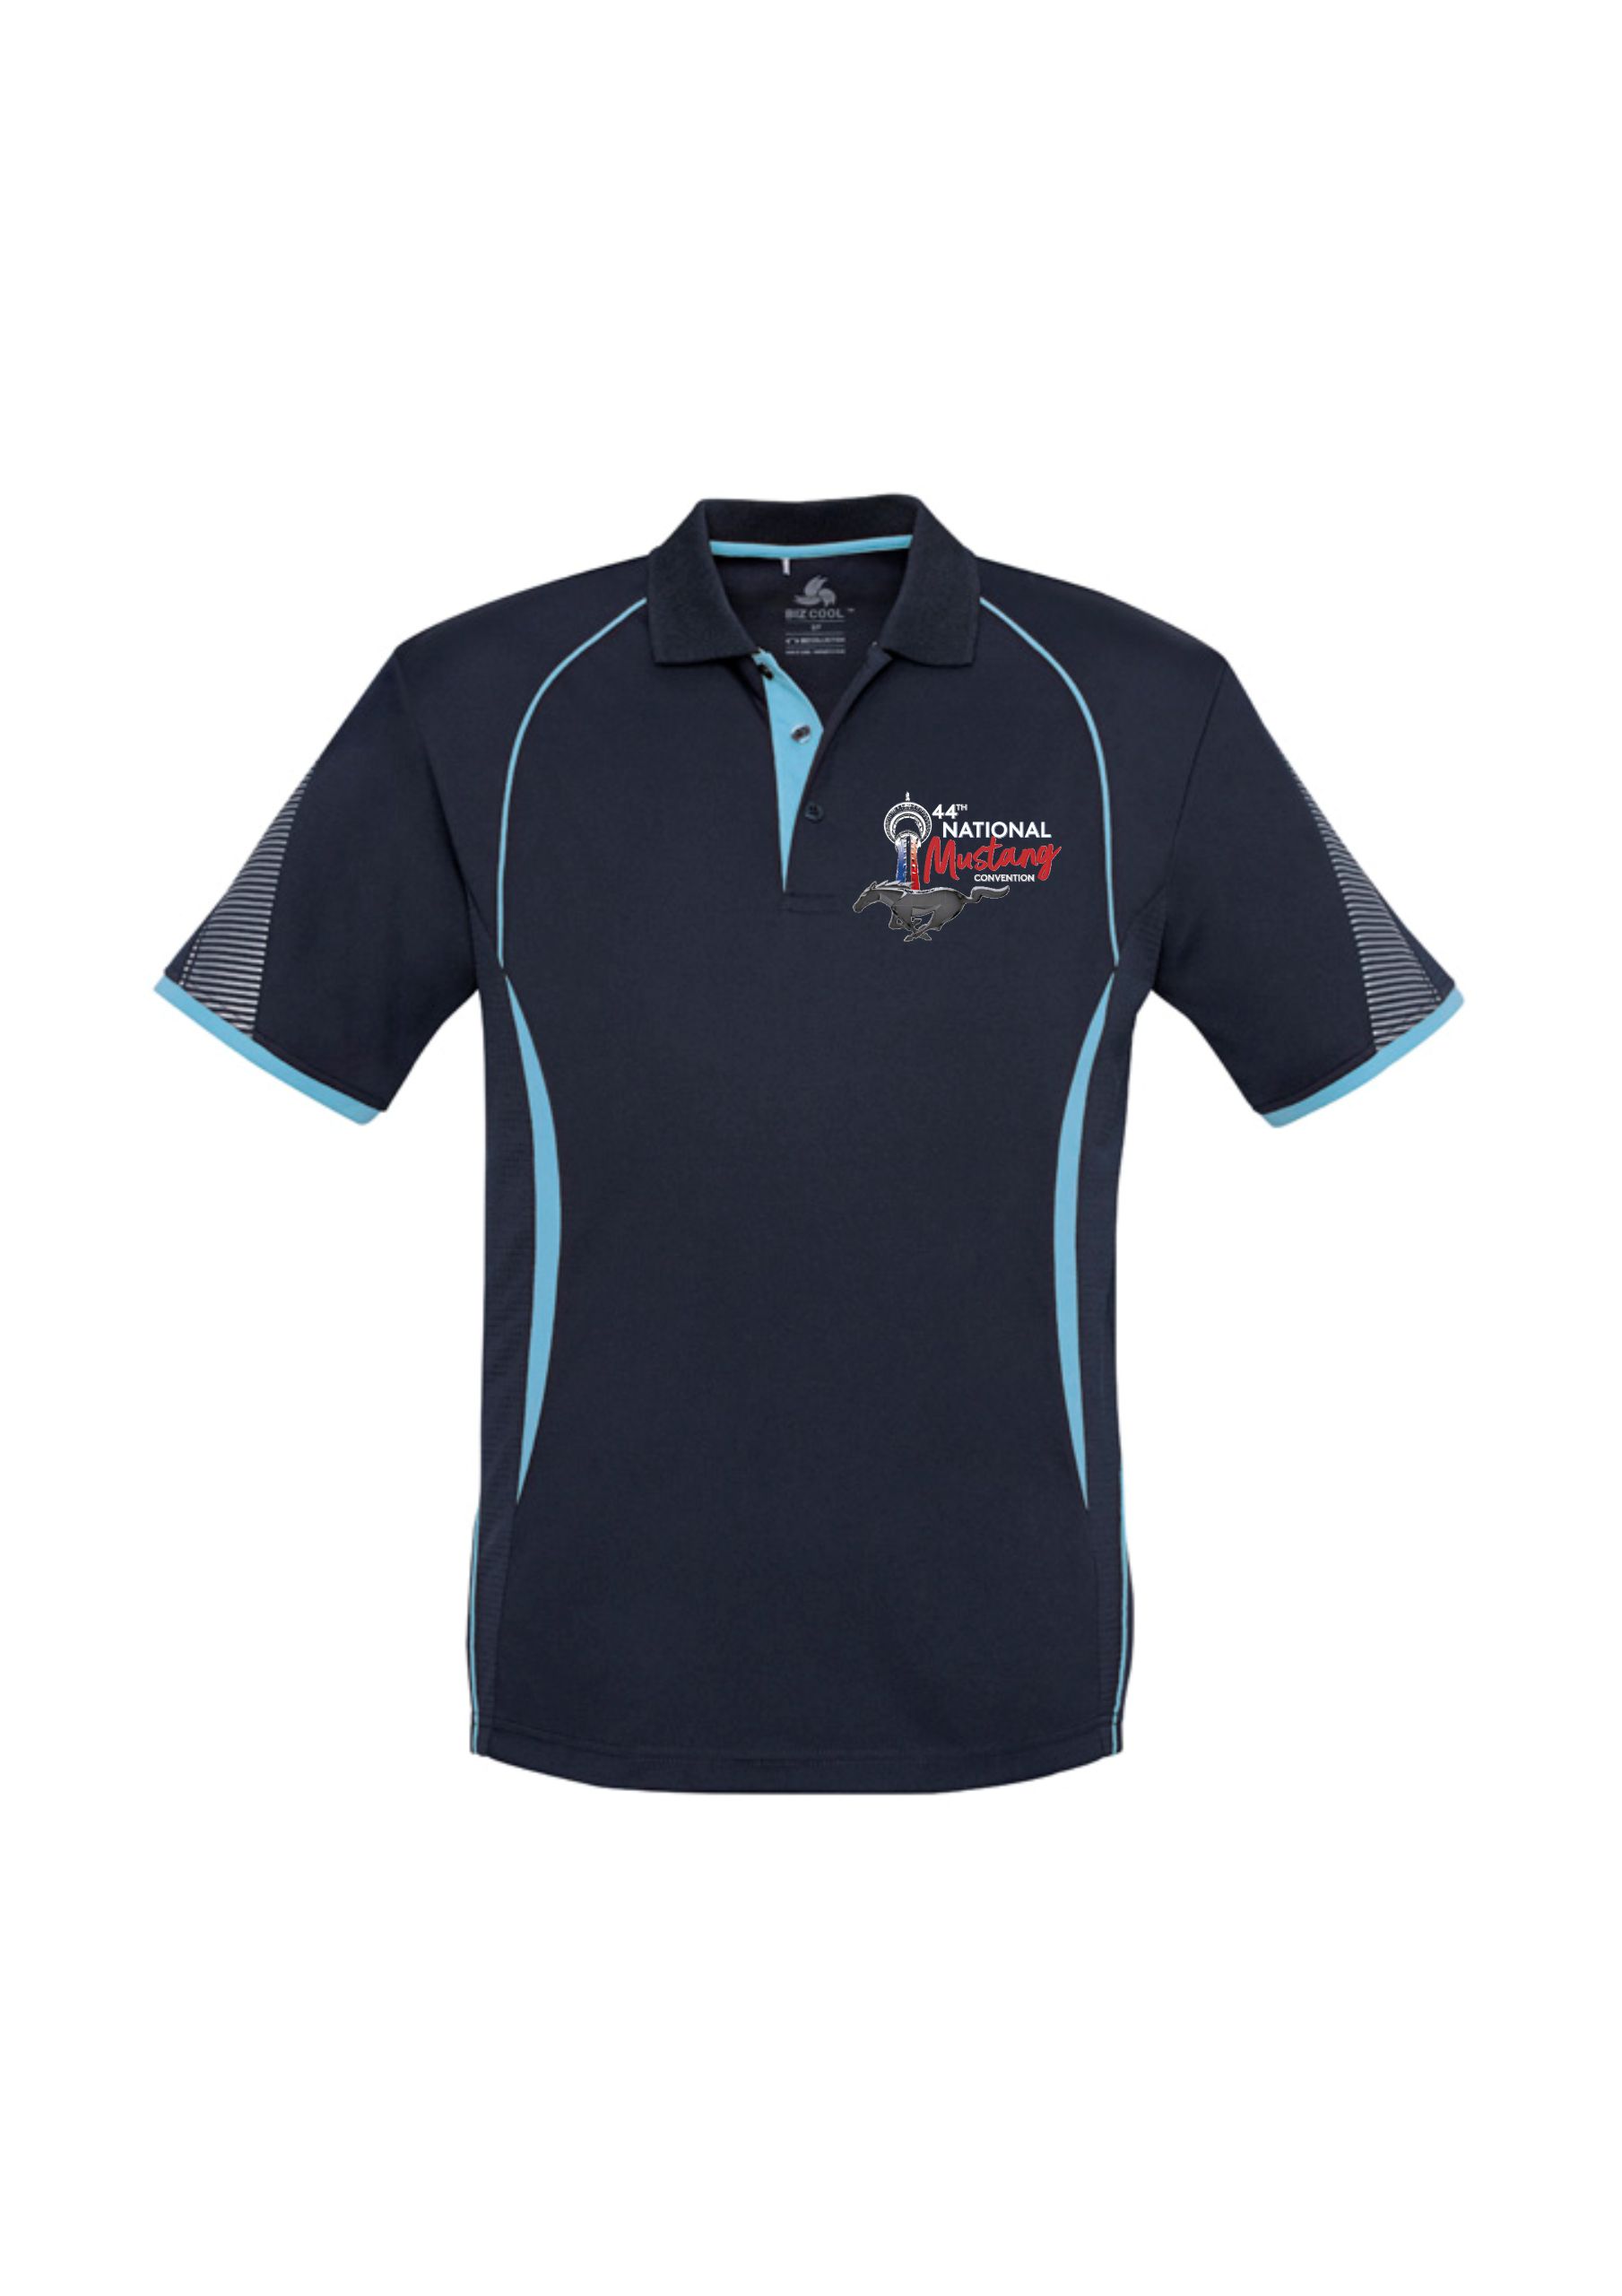 Men's Polo Shirt Front w/ embroidered event logo